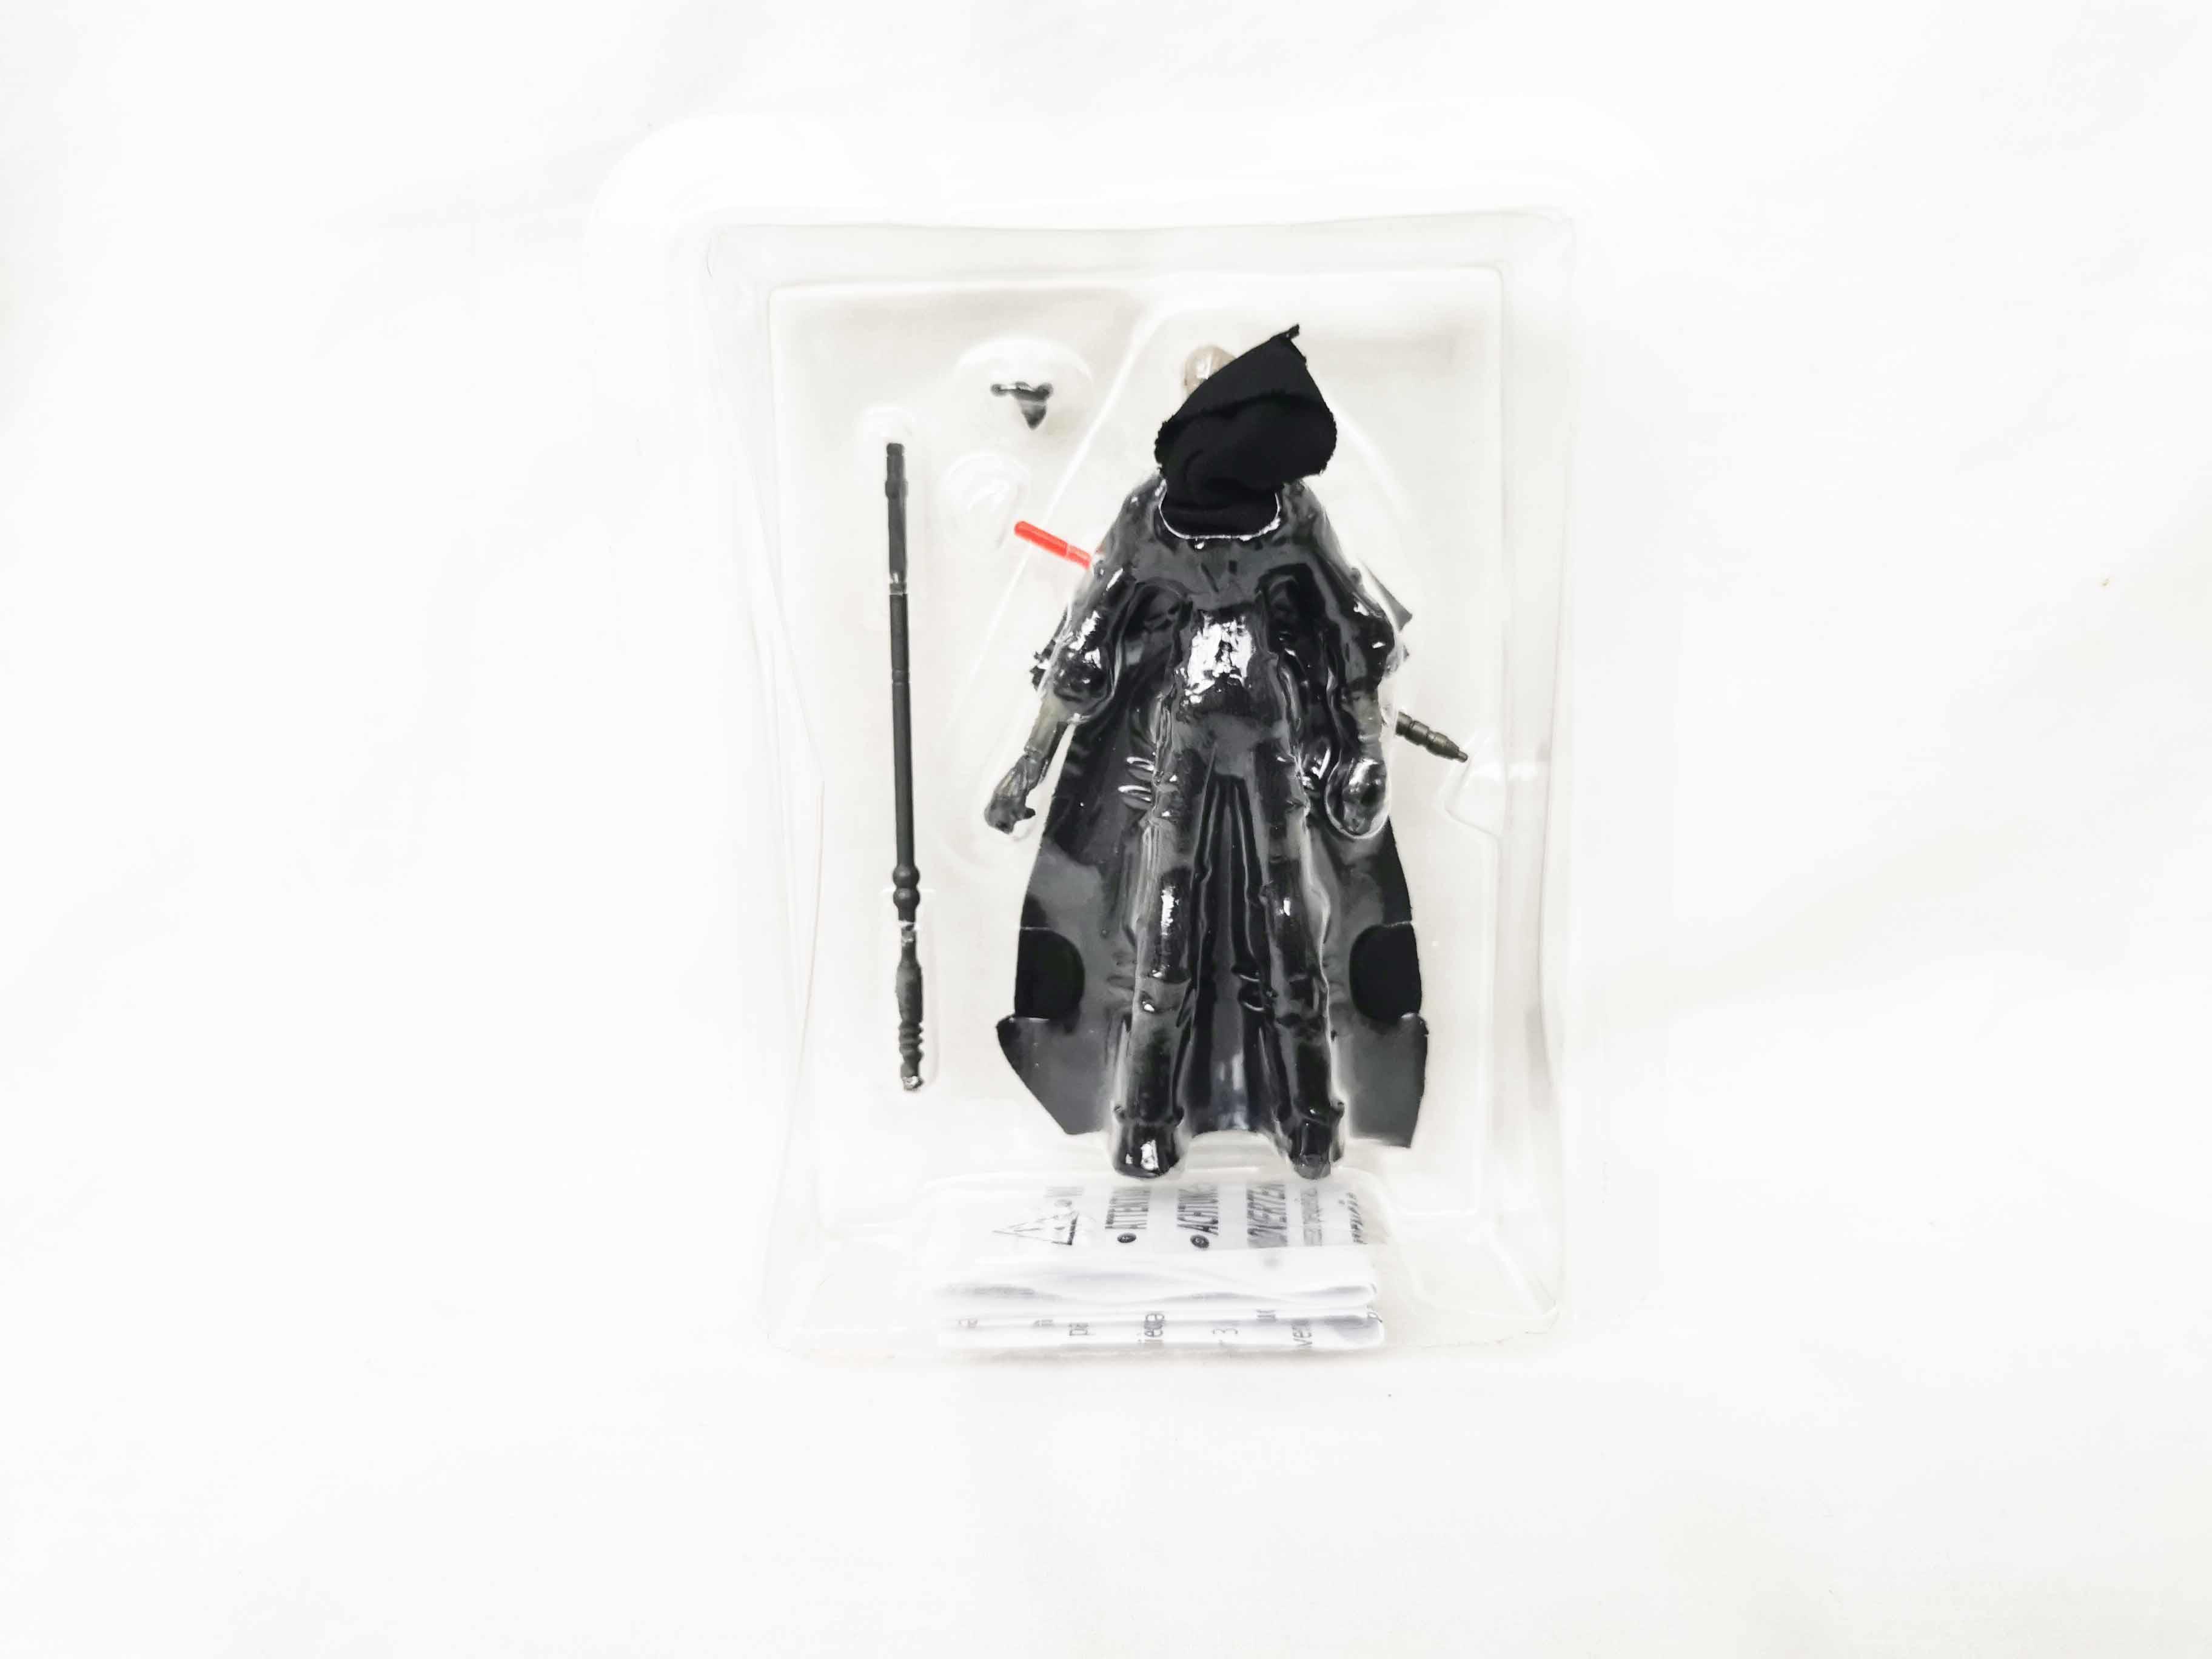 Darth Plagueis The Wise Sith Lord Star Wars 3.75 Action Figure in plastic bubble